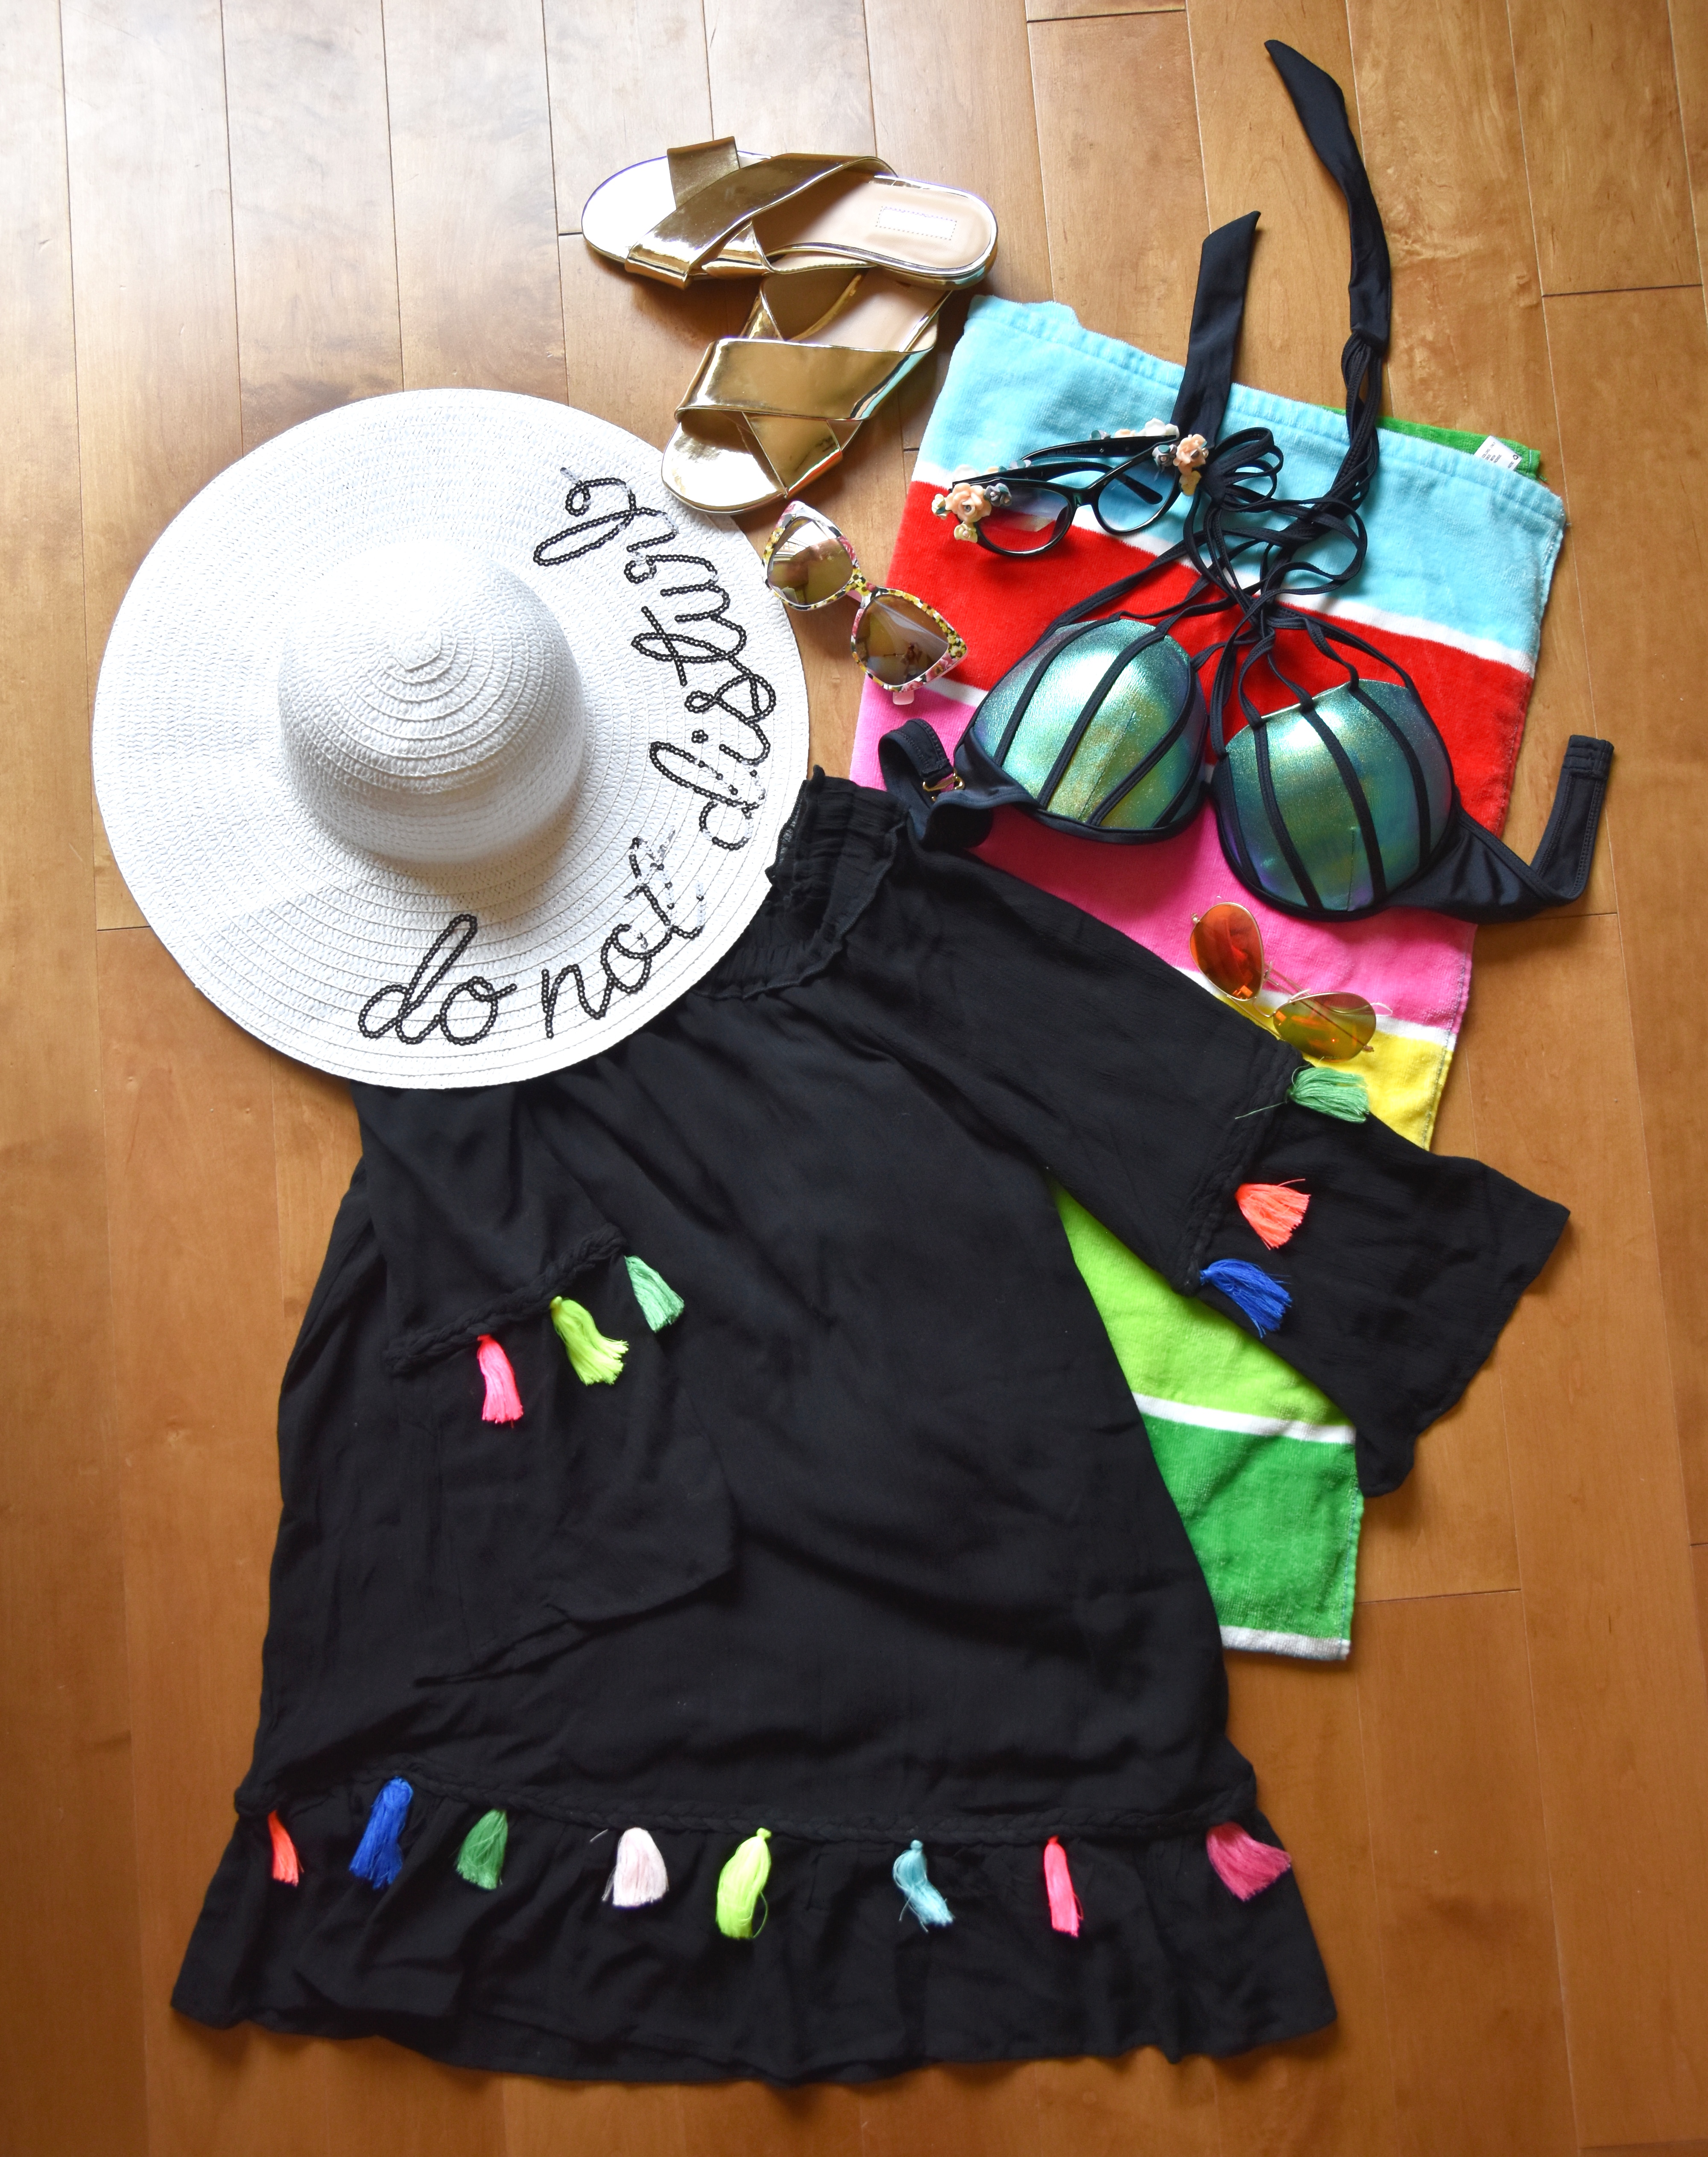 A2F What to Pack for a Bachelorette Weekend Swimwear including swimsuits, hats, cover ups, flip flops